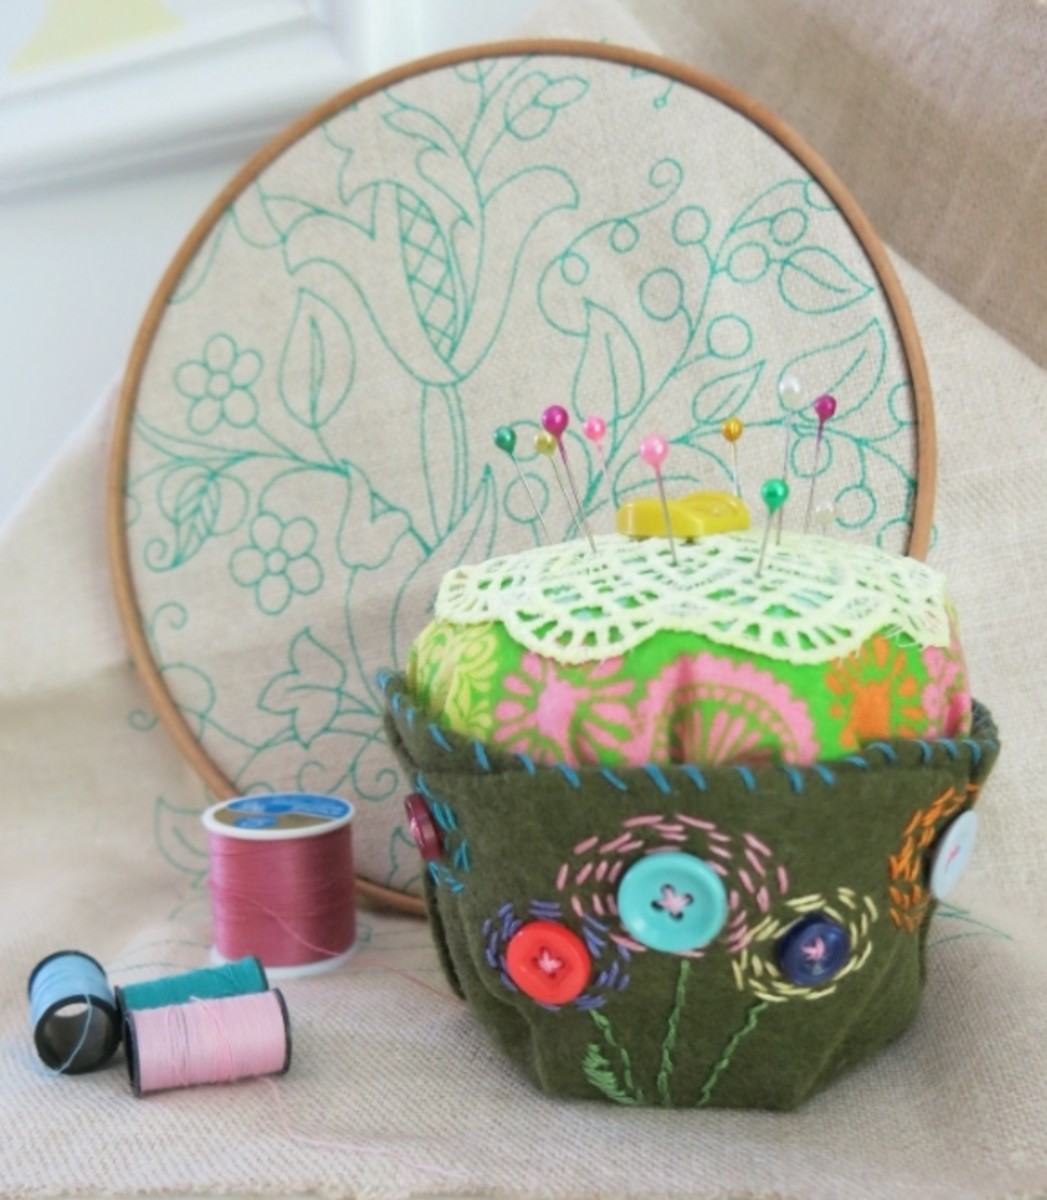 Completed DIY pincushion